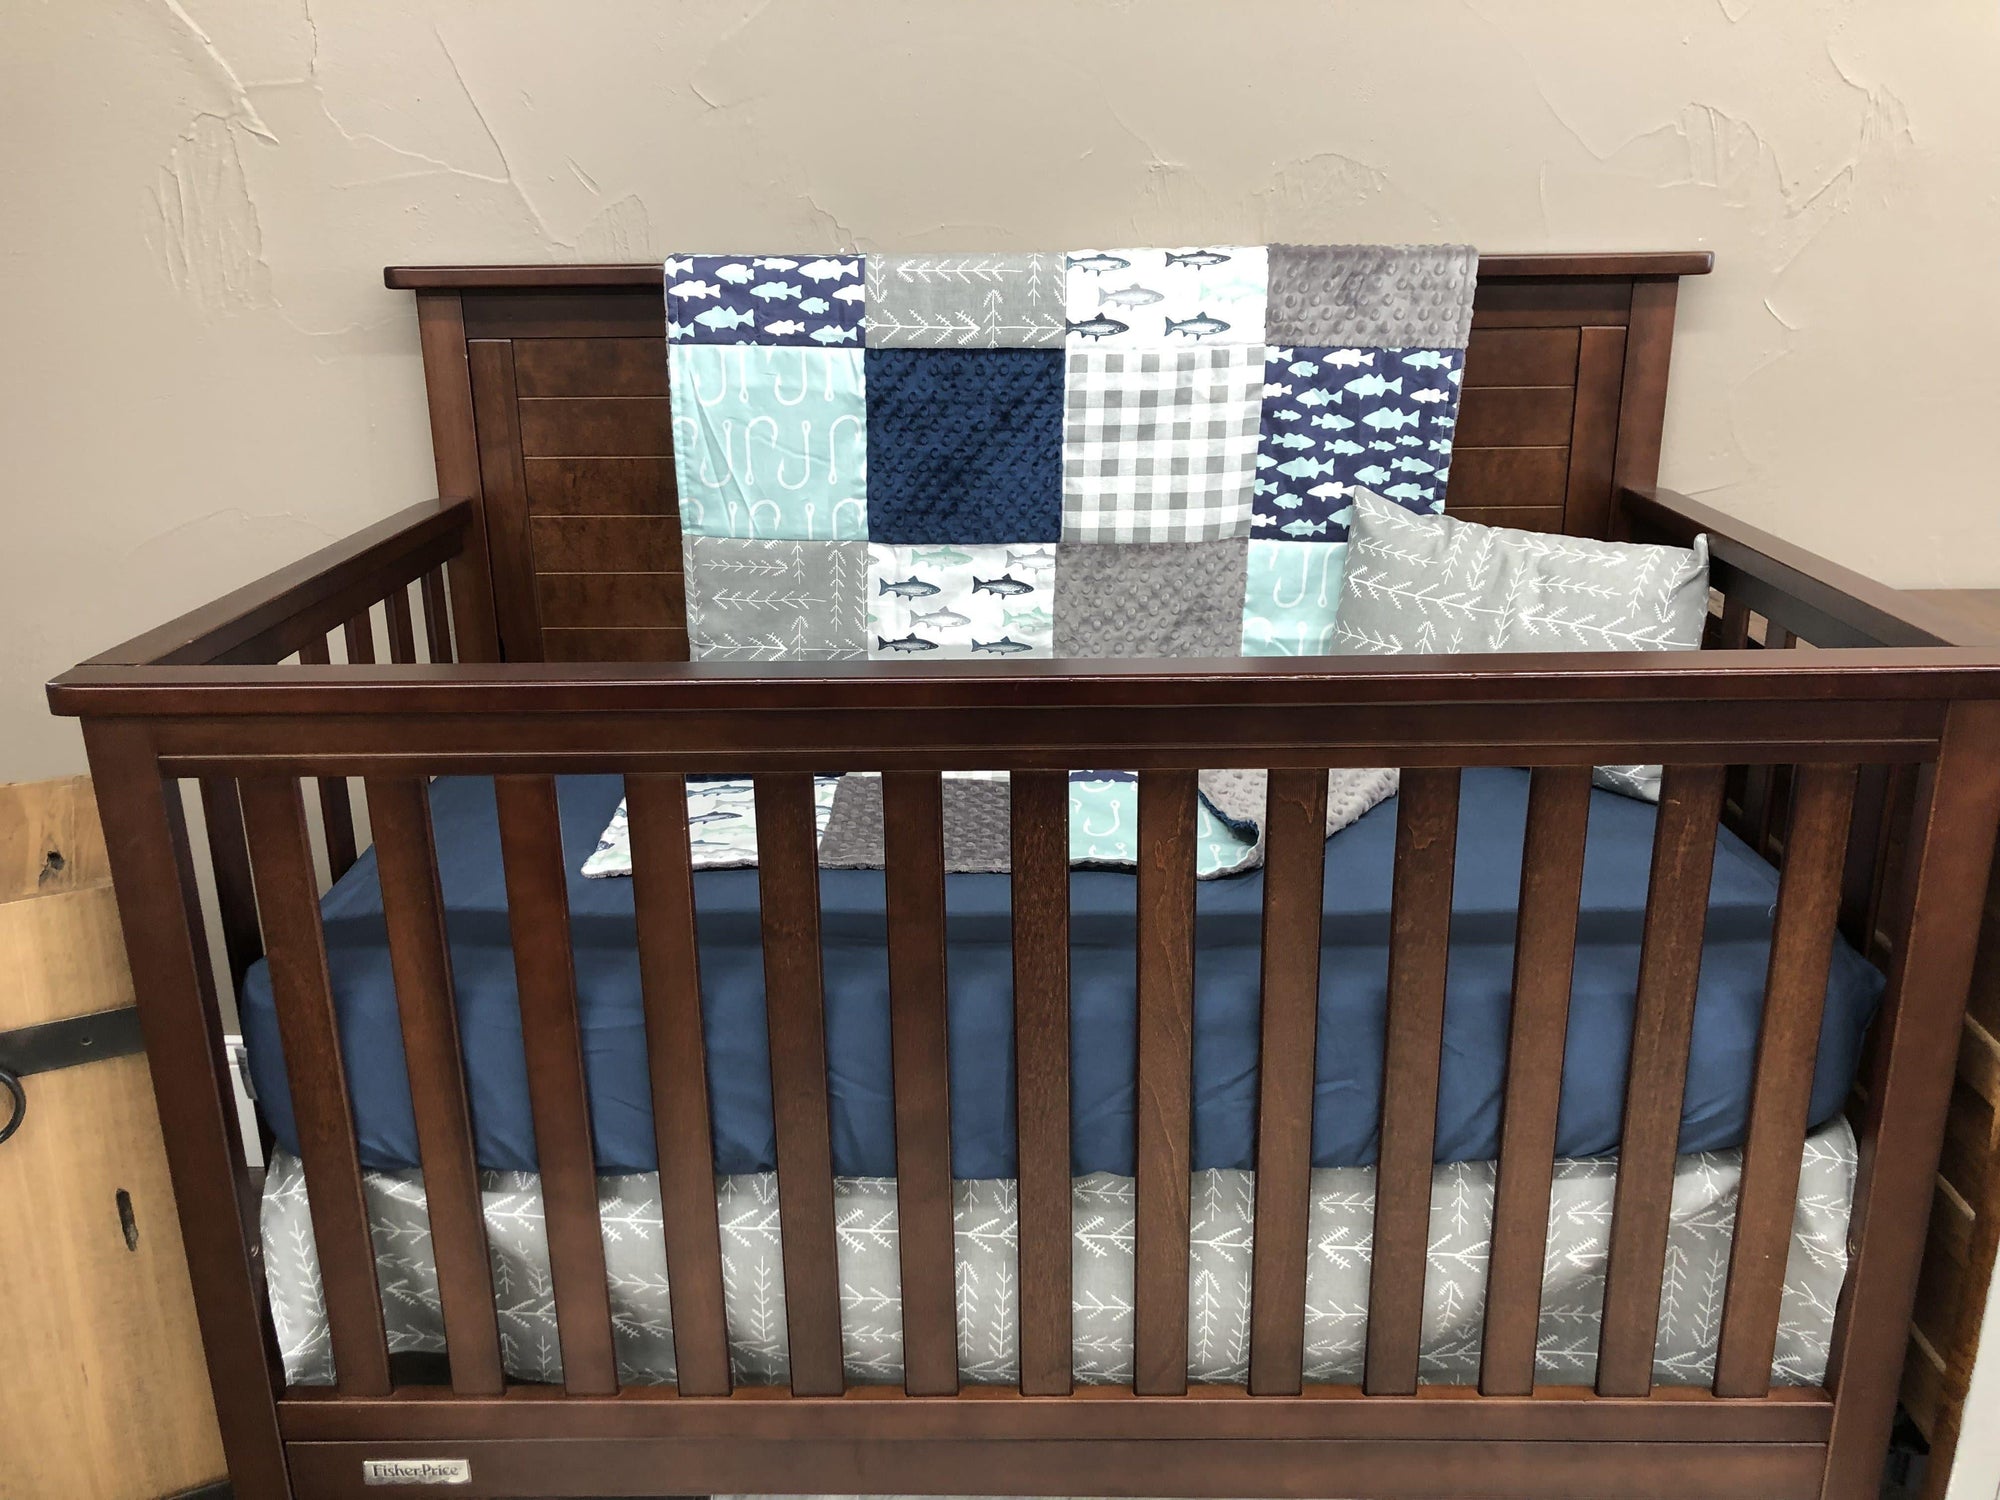 New Release Boy Crib Bedding - Trout Fishing Baby Bedding Collection - DBC Baby Bedding Co 